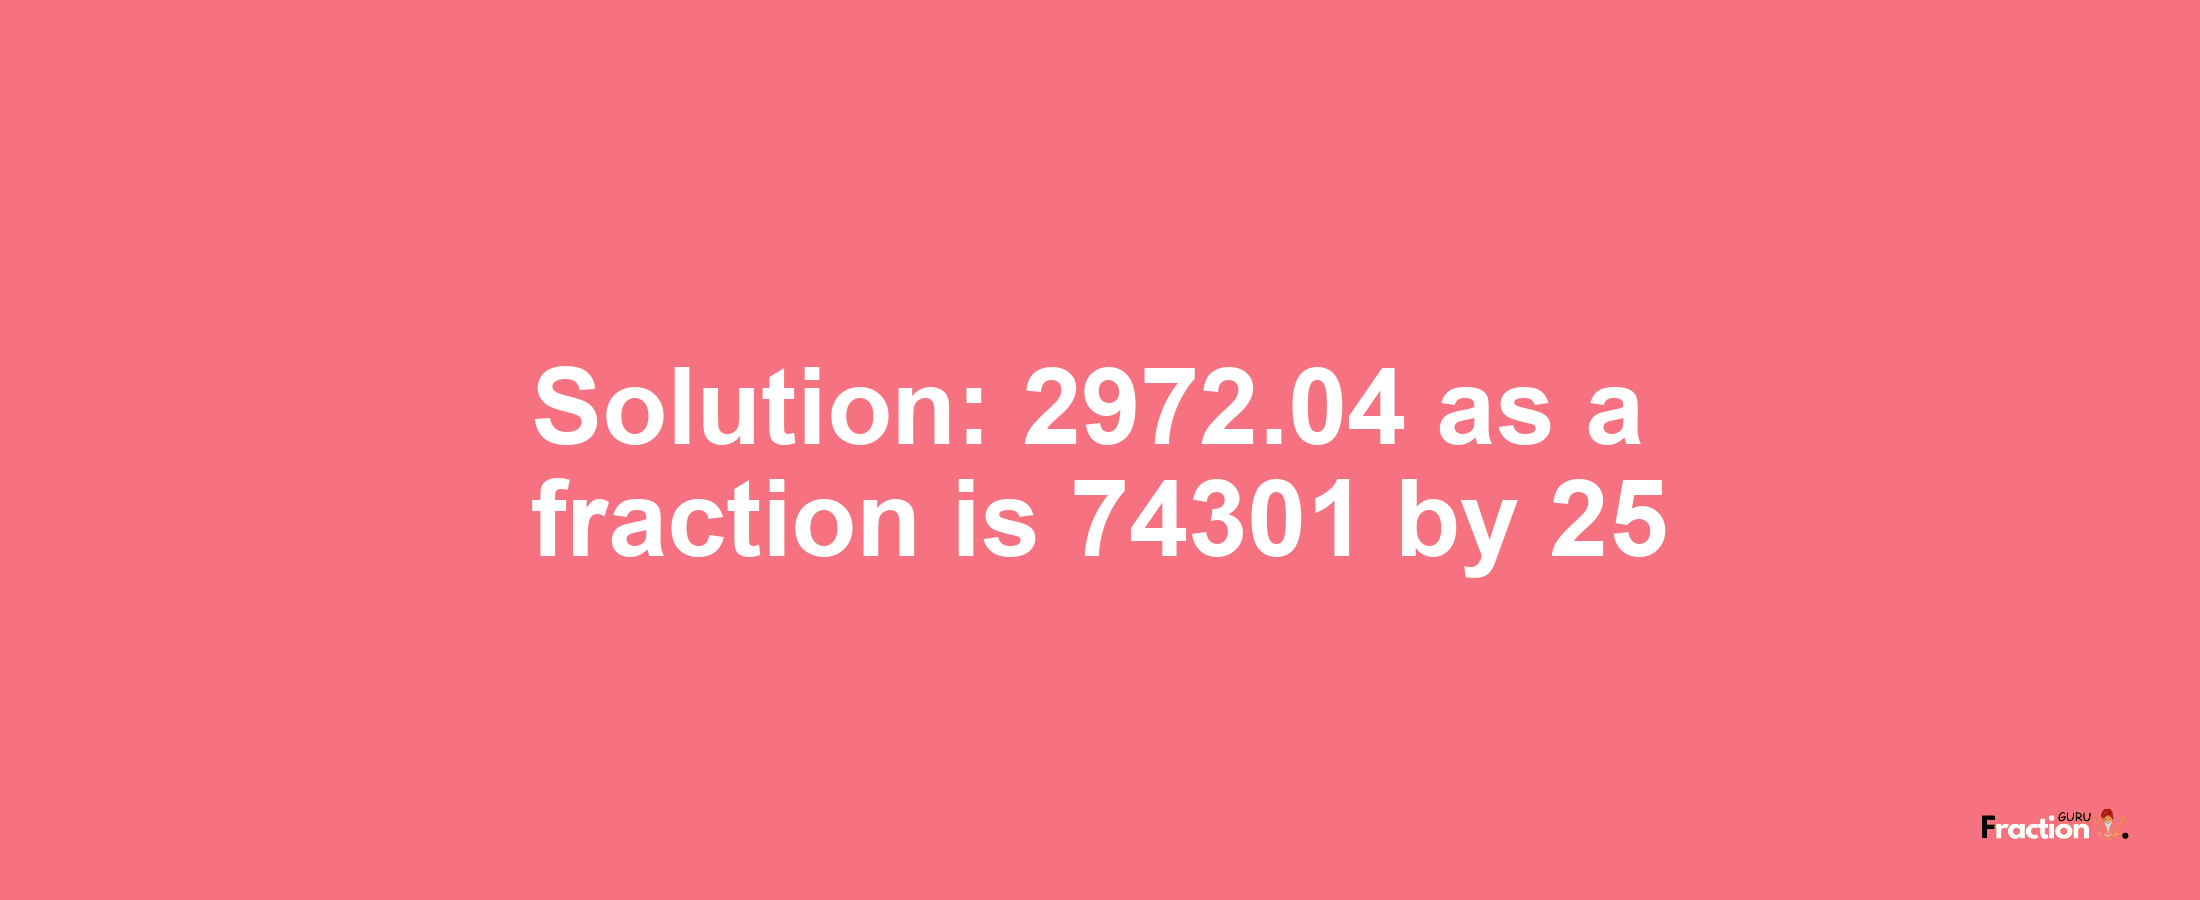 Solution:2972.04 as a fraction is 74301/25